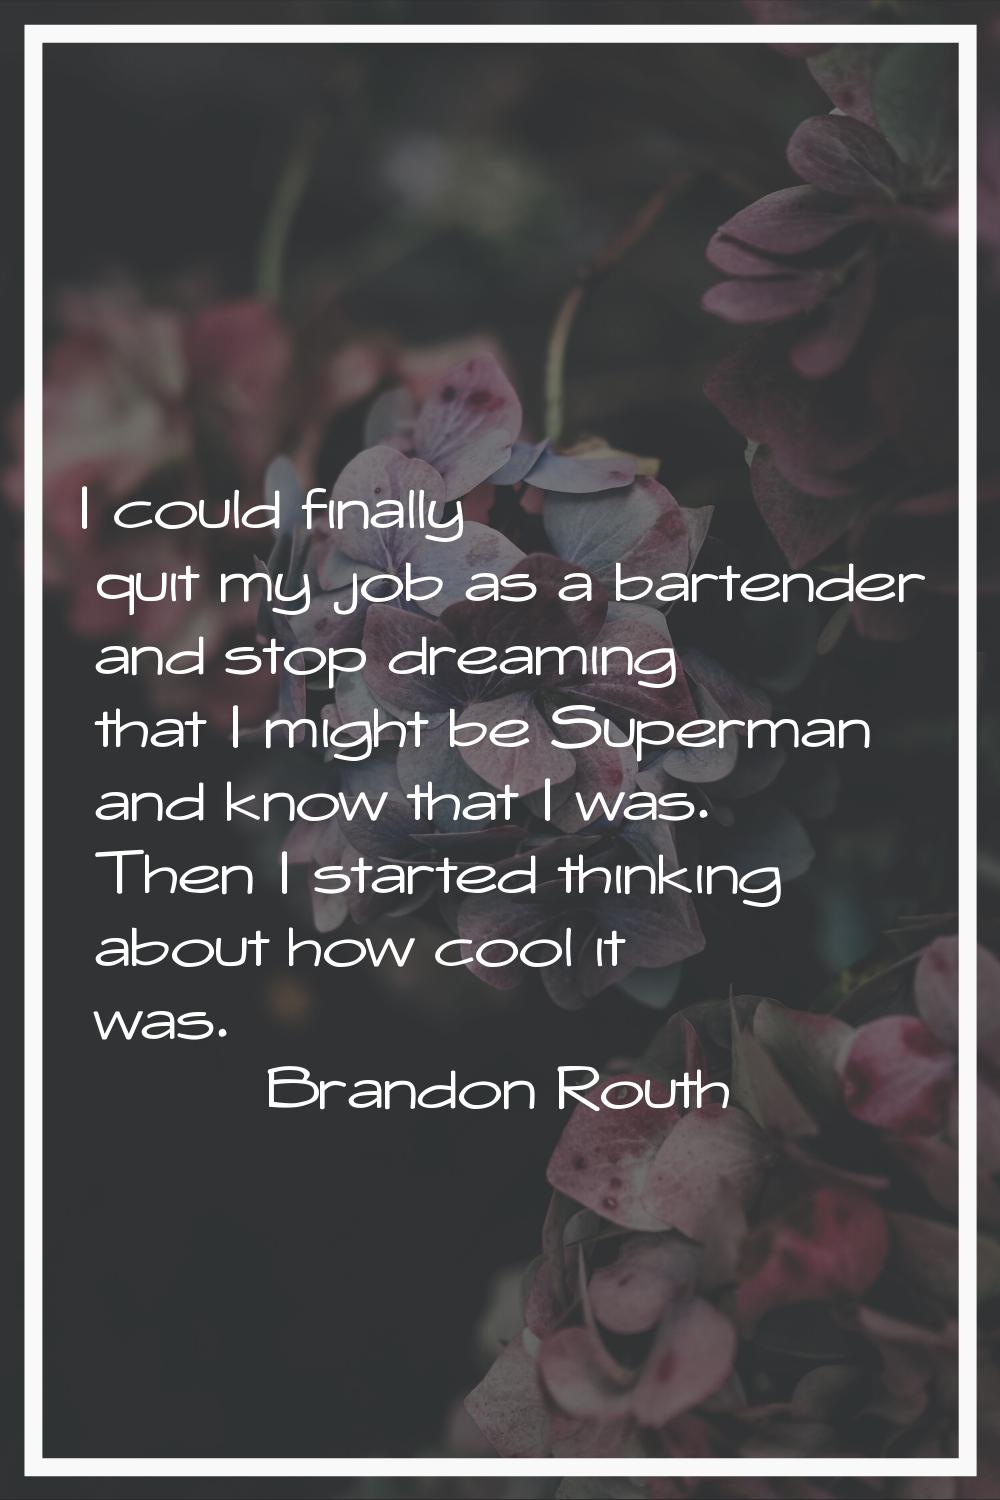 I could finally quit my job as a bartender and stop dreaming that I might be Superman and know that